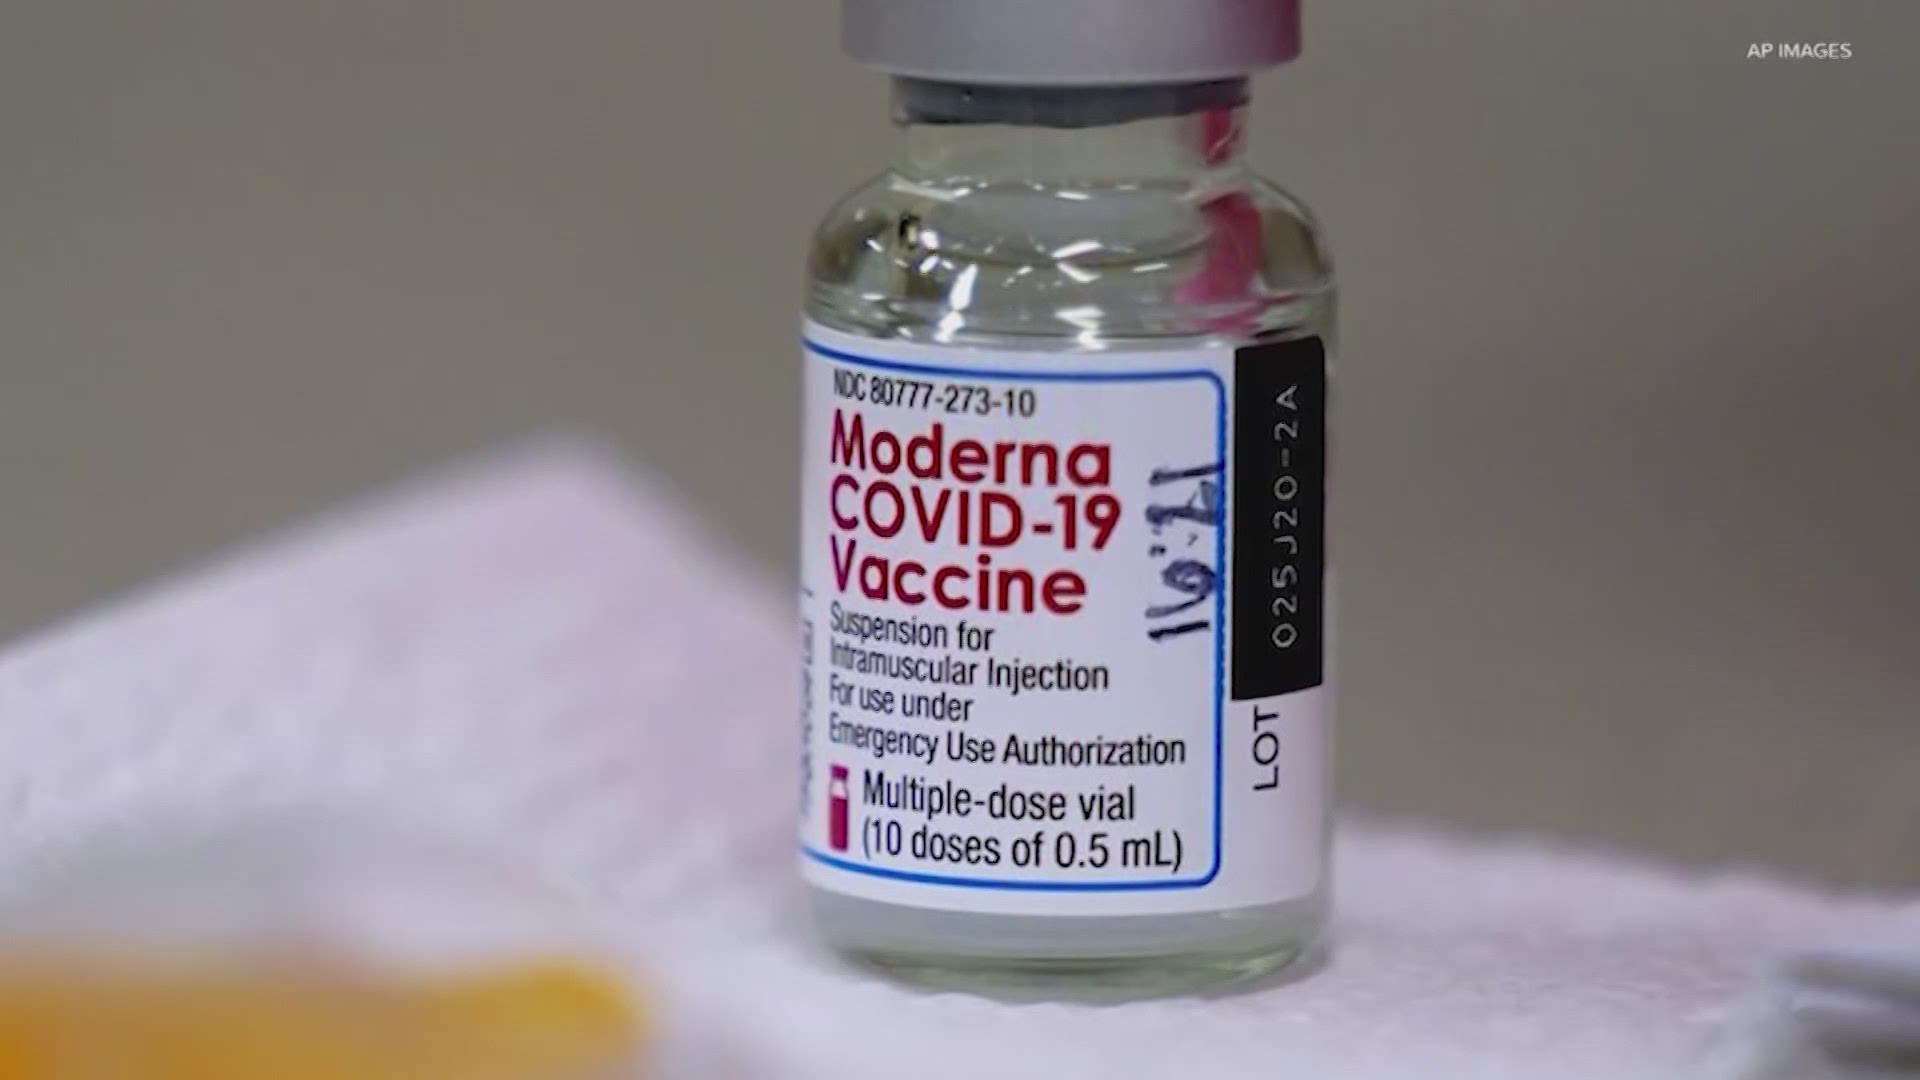 Dr. Hasan Gokal was accused of stealing 10 doses of the COVID-19 vaccine in December 2020 from a Harris County Public Health District distribution site.